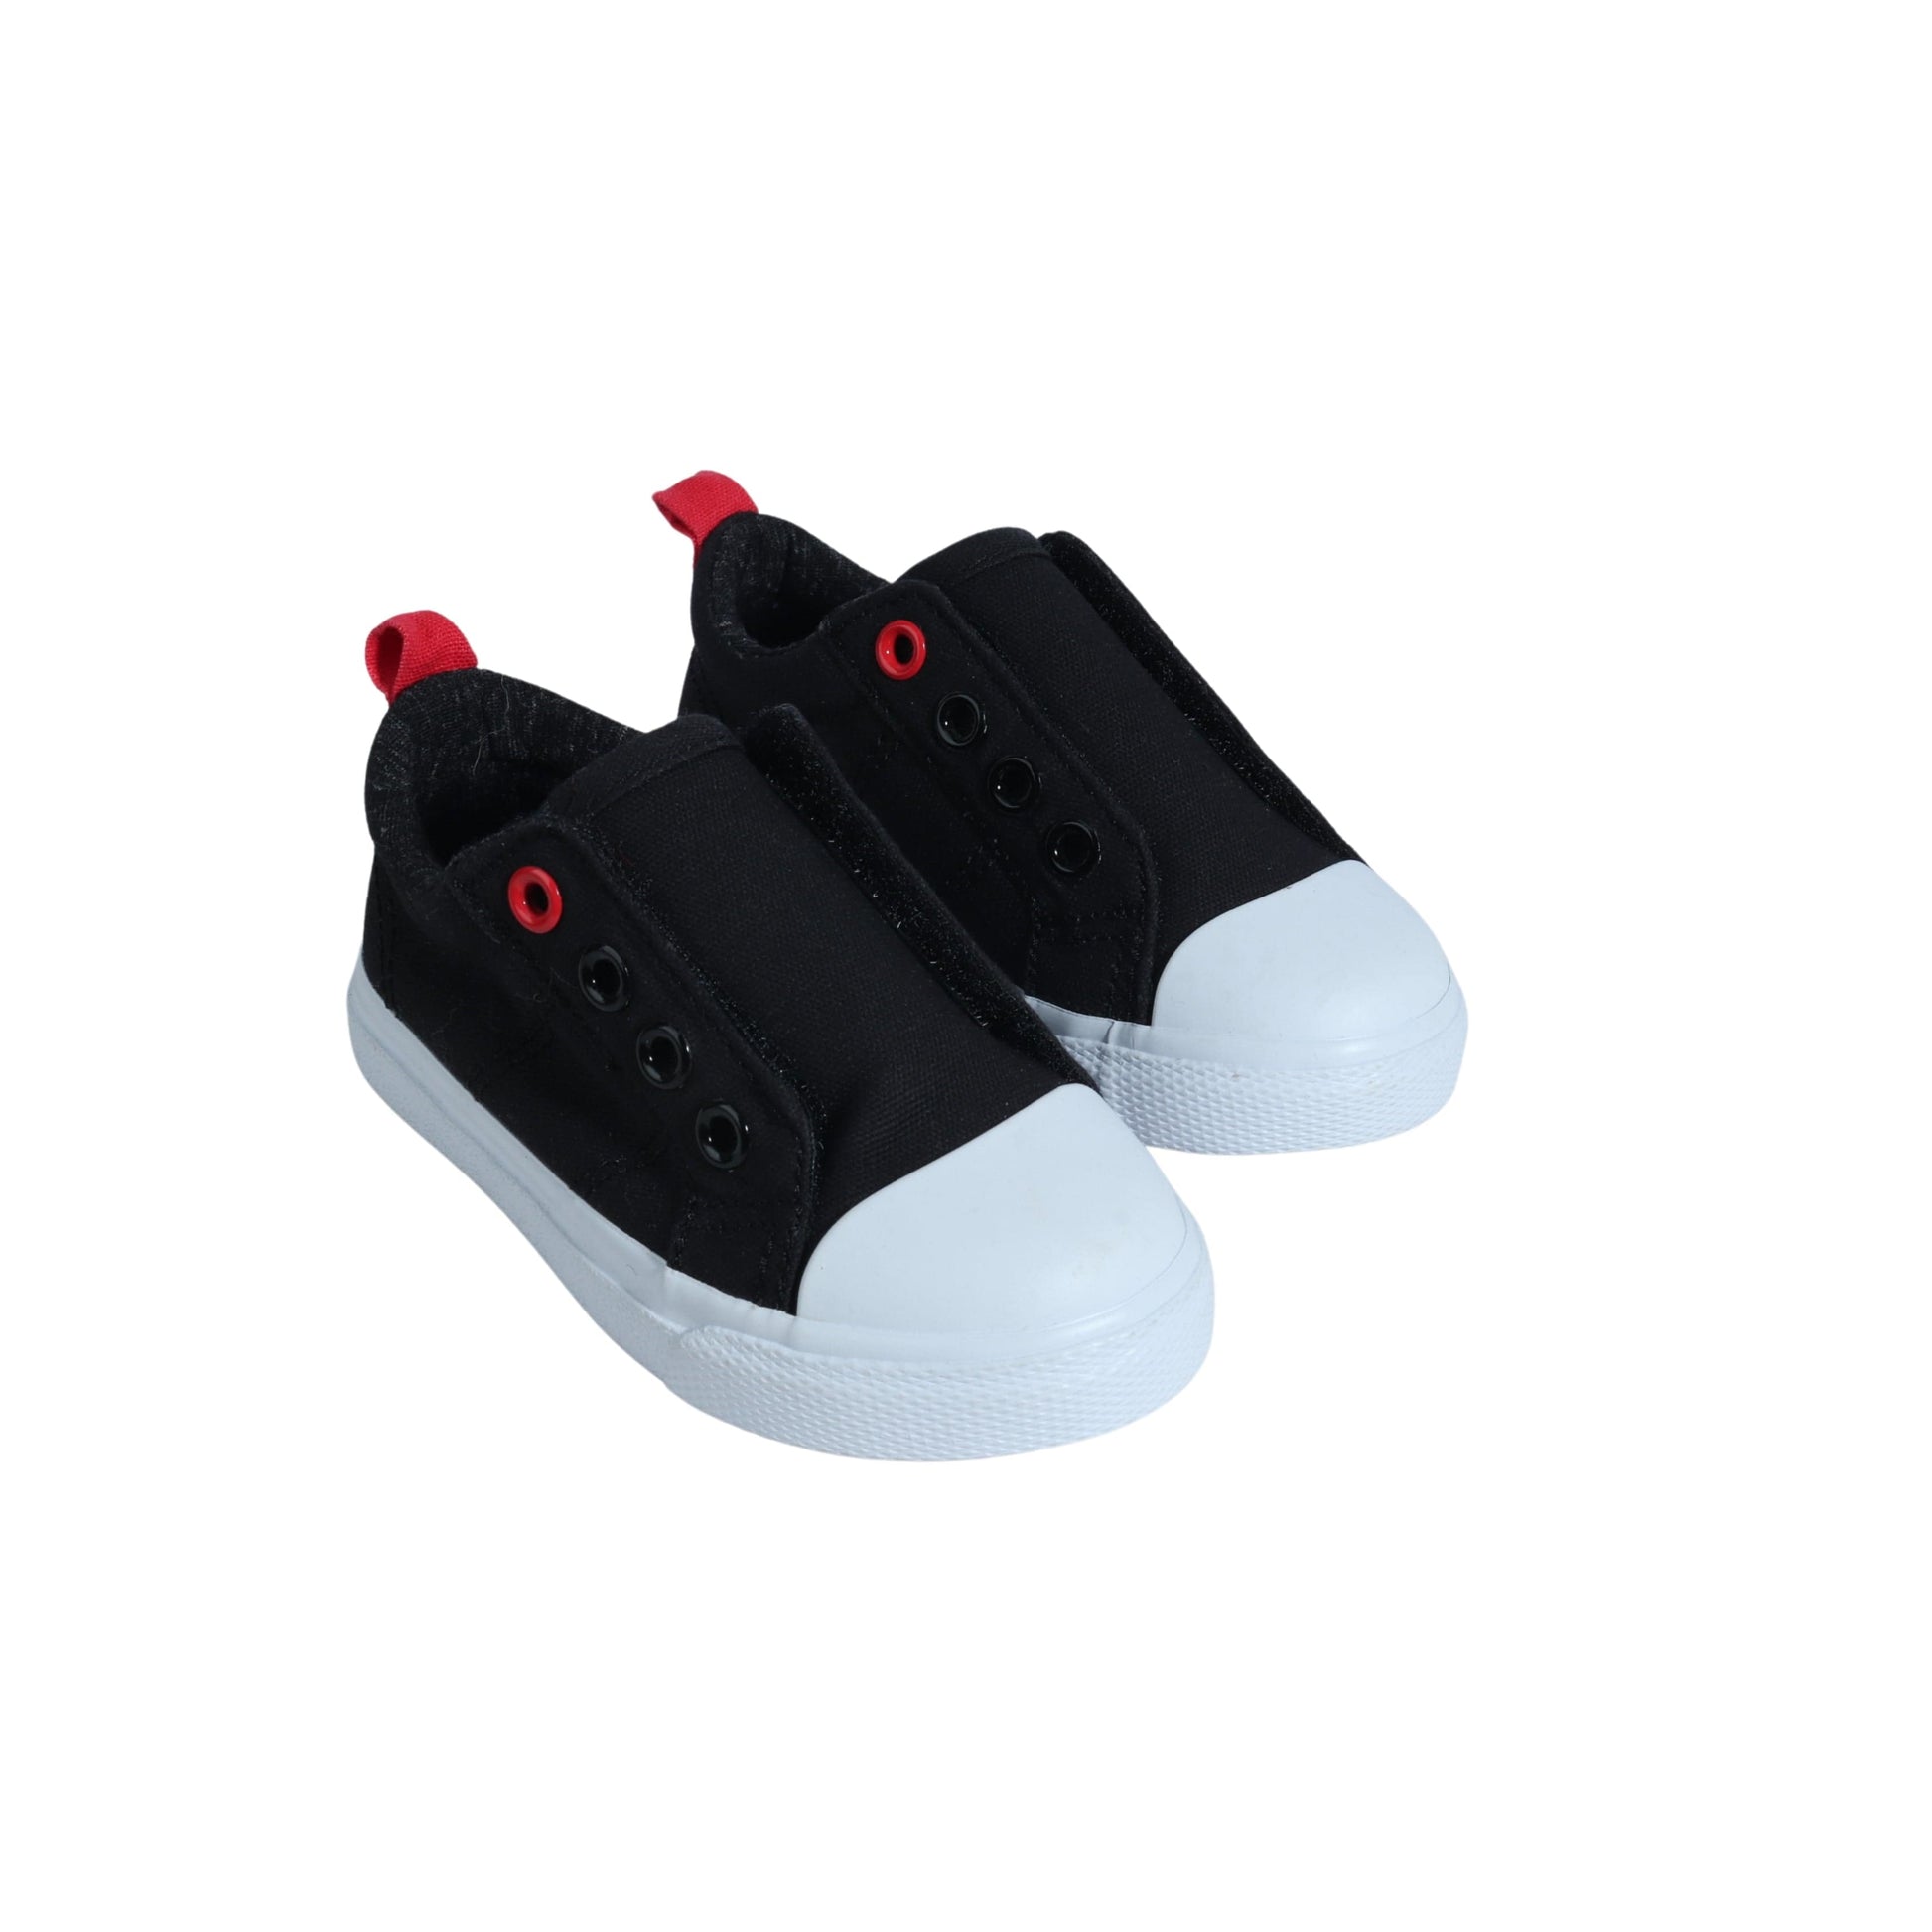 CAT & JACK Baby Shoes 22 / Black CAT & JACK - Baby - No Lace Up Sneakers